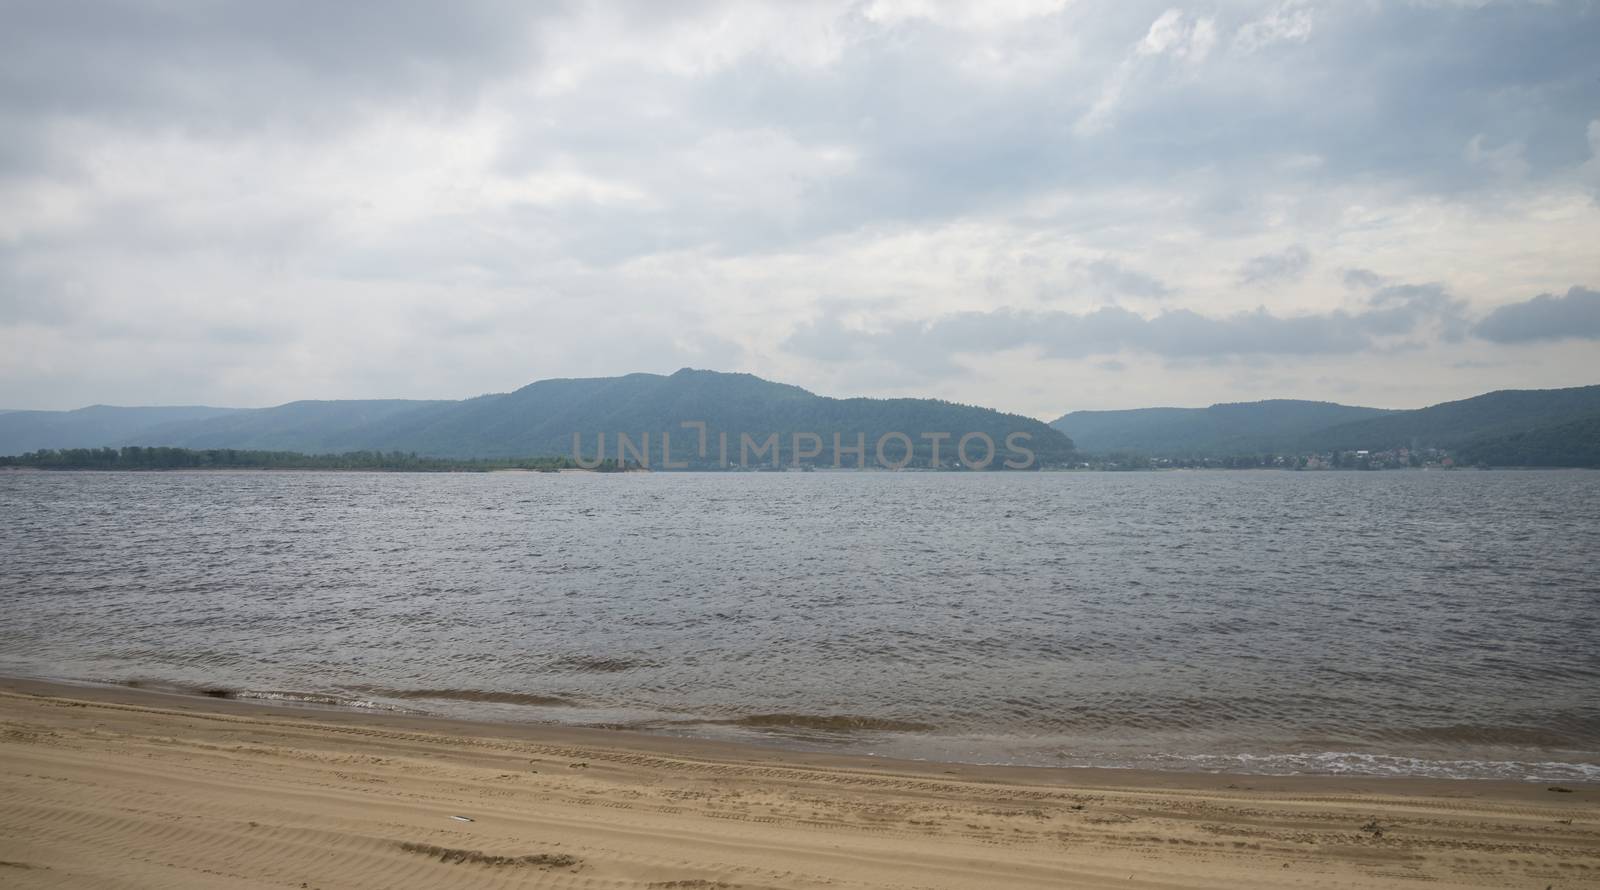 Panoramic view of the Zhiguli mountains from the Peninsula Kopylovo. Cloudy day 21 July 2018.